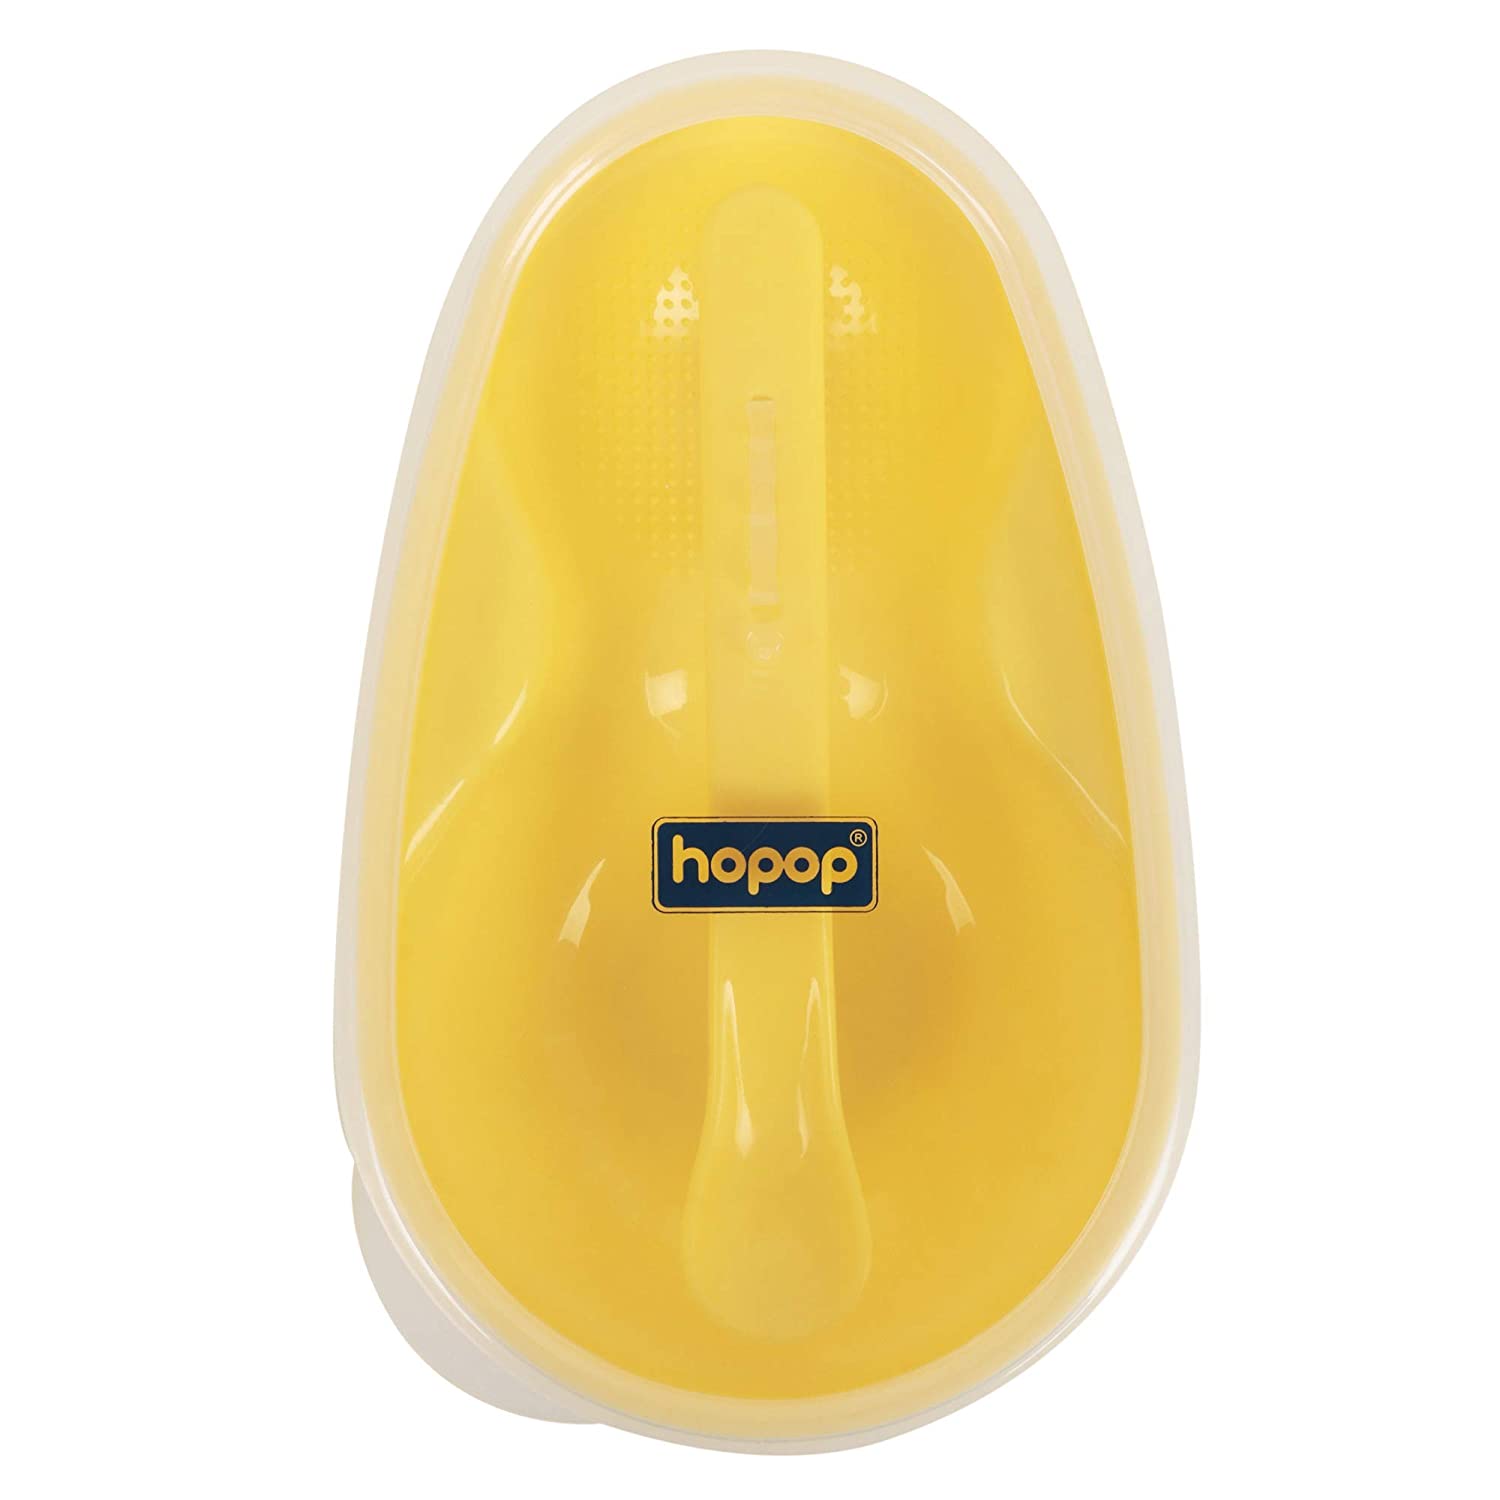 HOPOP Feeding Bowl With Lid & Spoon For Babies - Yellow 6m+, 210ml